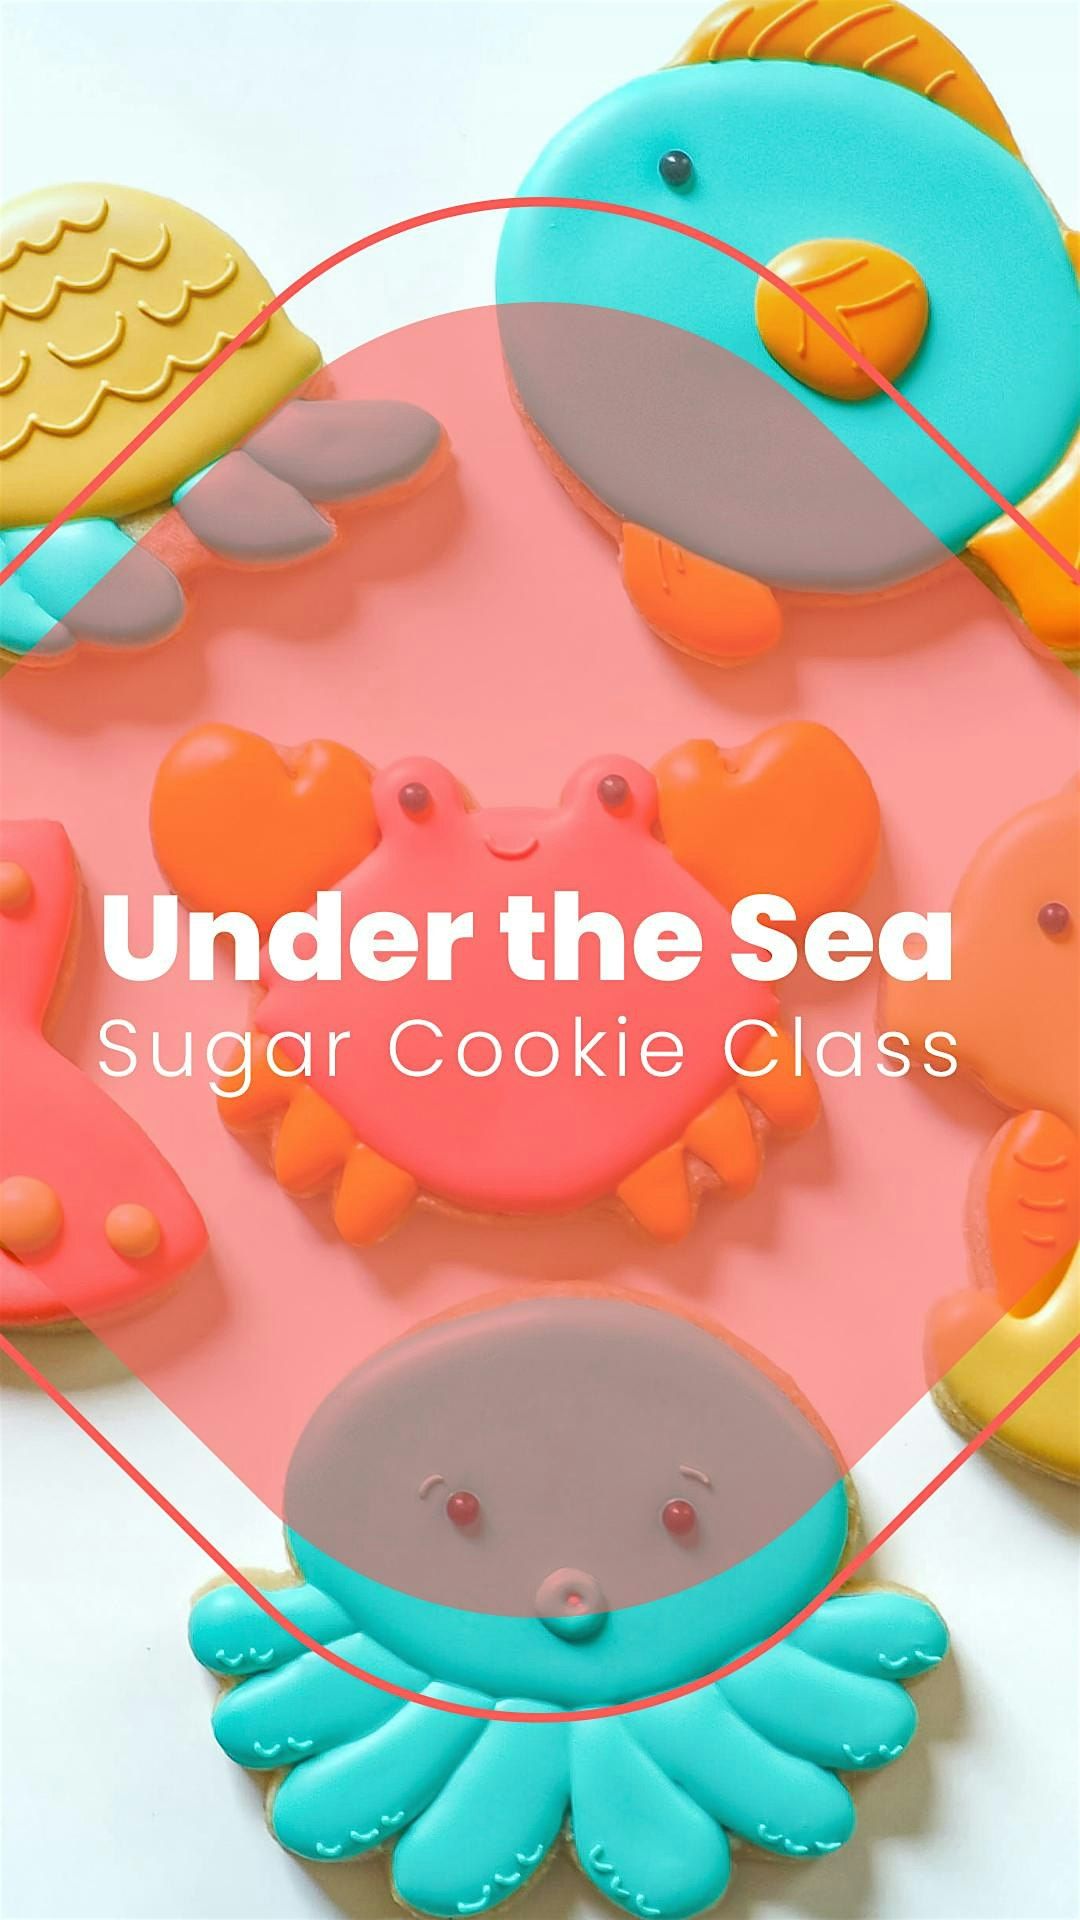 11:00 AM - Under the Sea Sugar Cookie Decorating Class